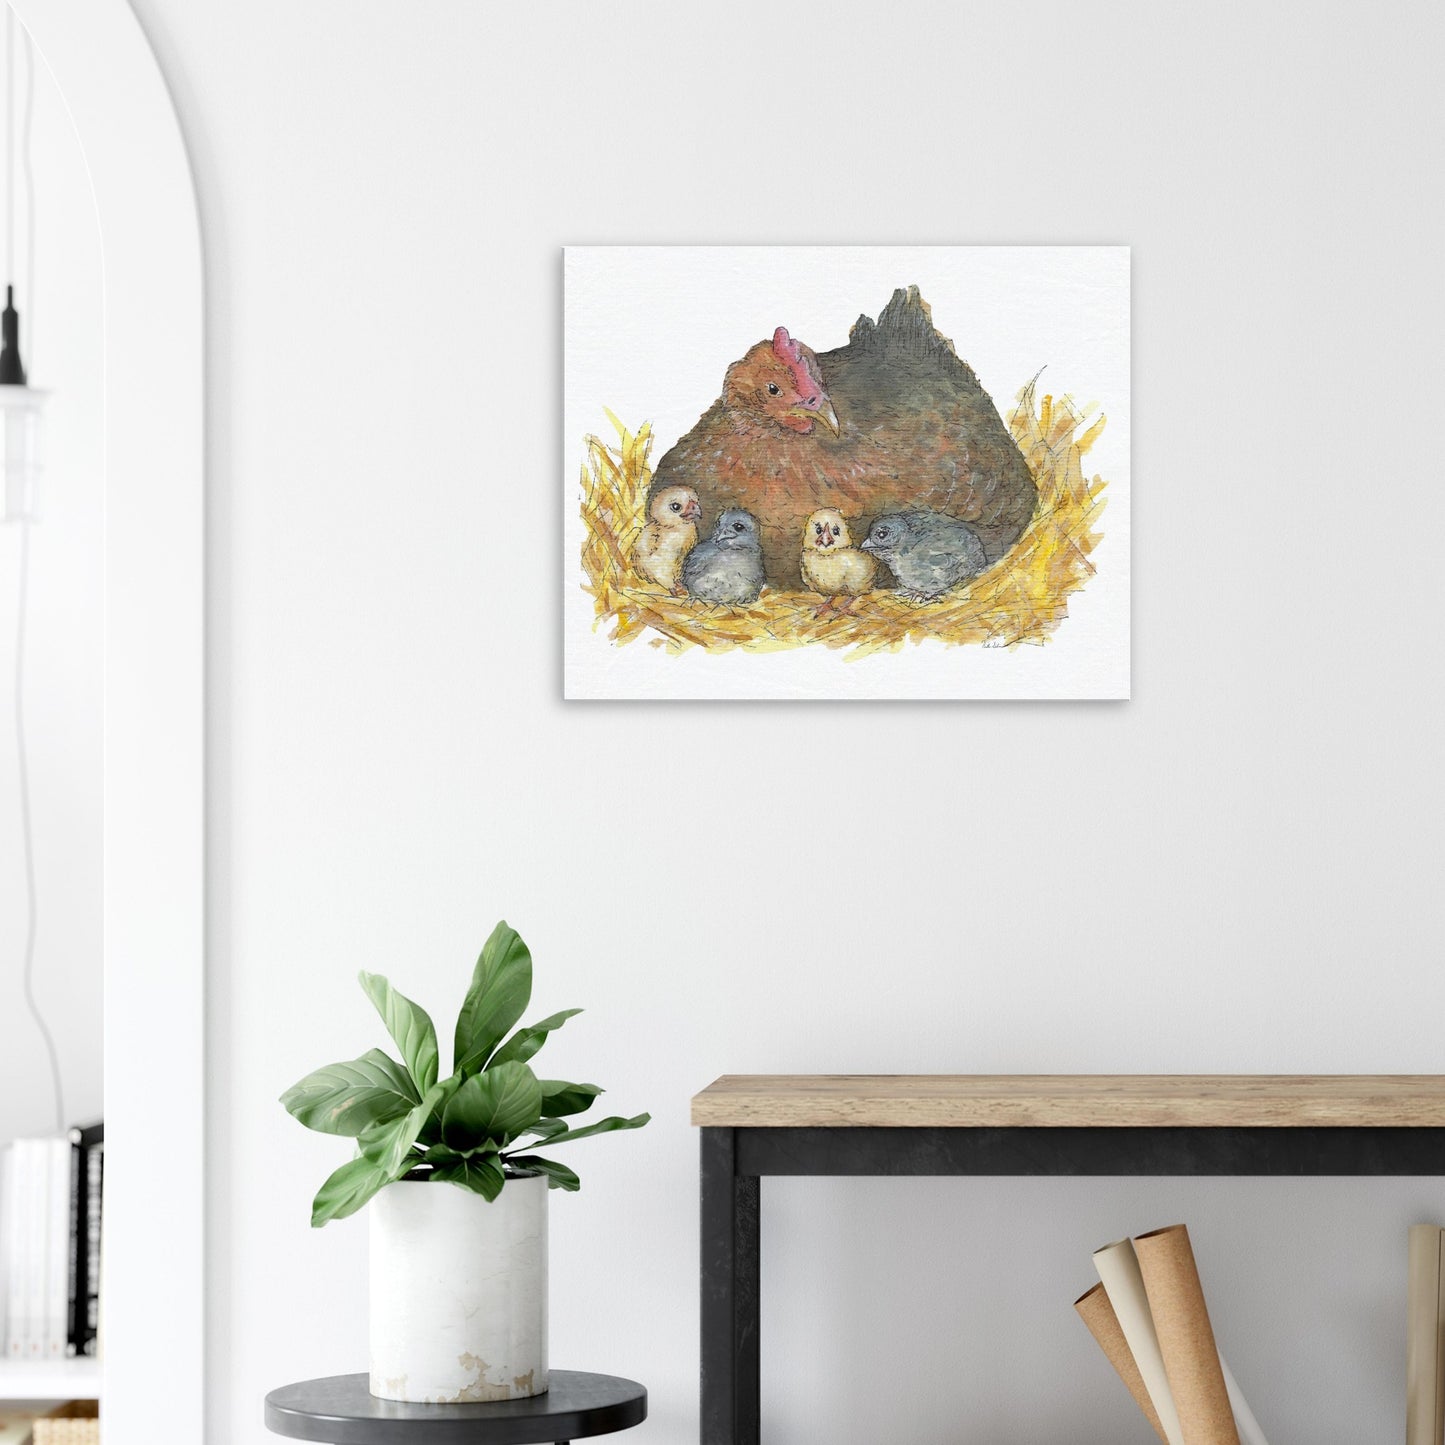 24 by 30 inch slim canvas Mother Hen print. Features a watercolor mother hen and her four chicks in a nest. Shown on wall above wooden side table.